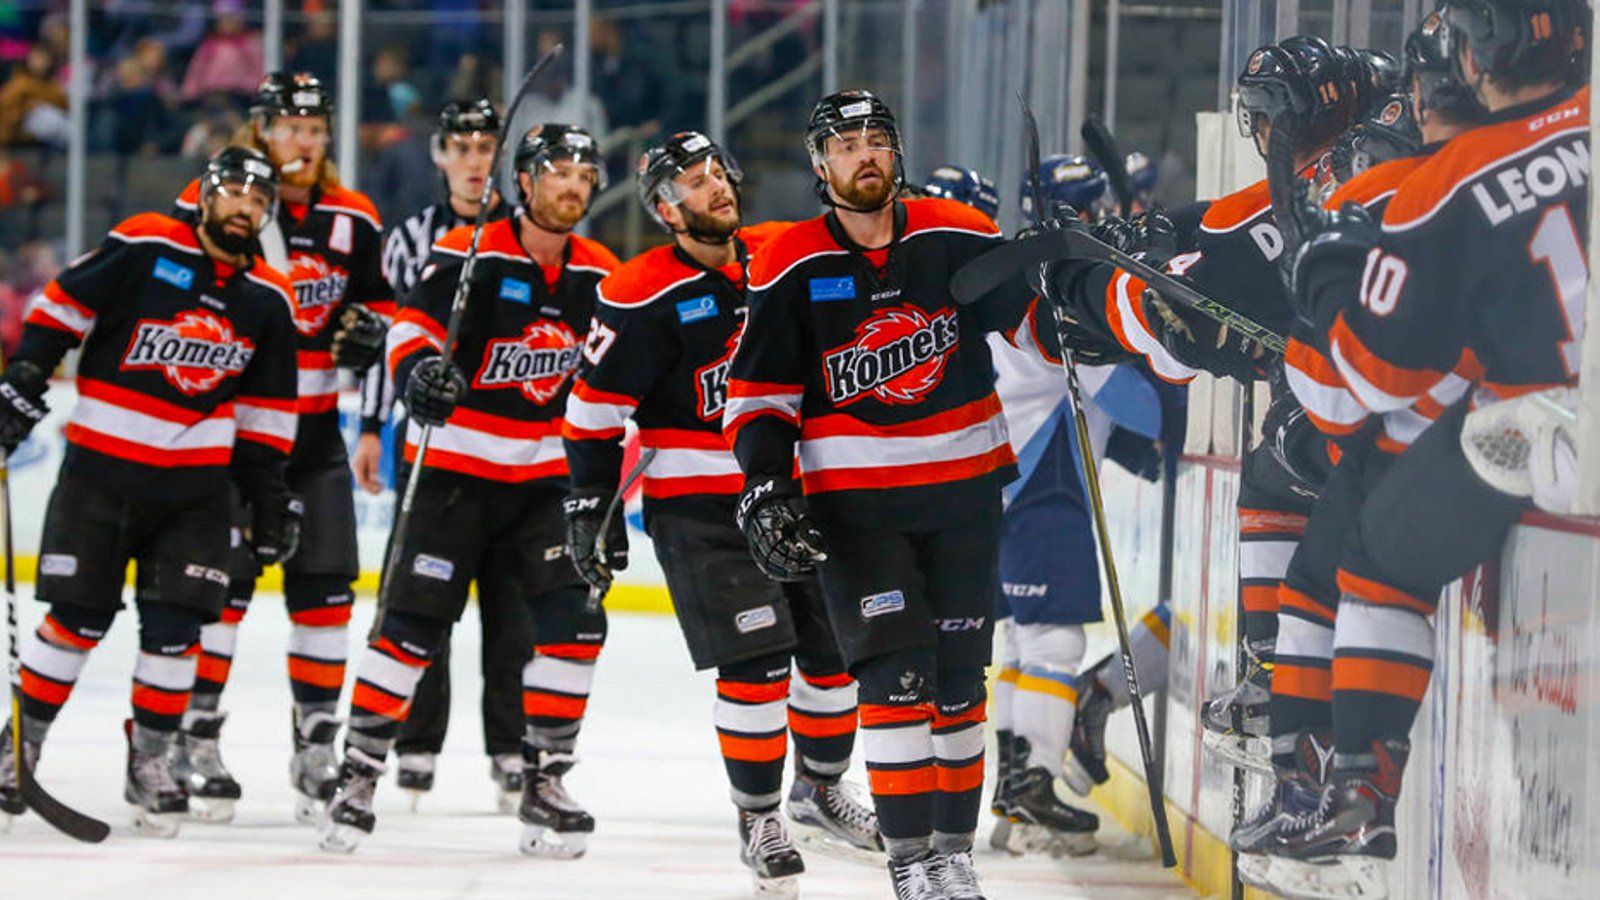 ECHL'S Komets rocked by serious allegations of fraud